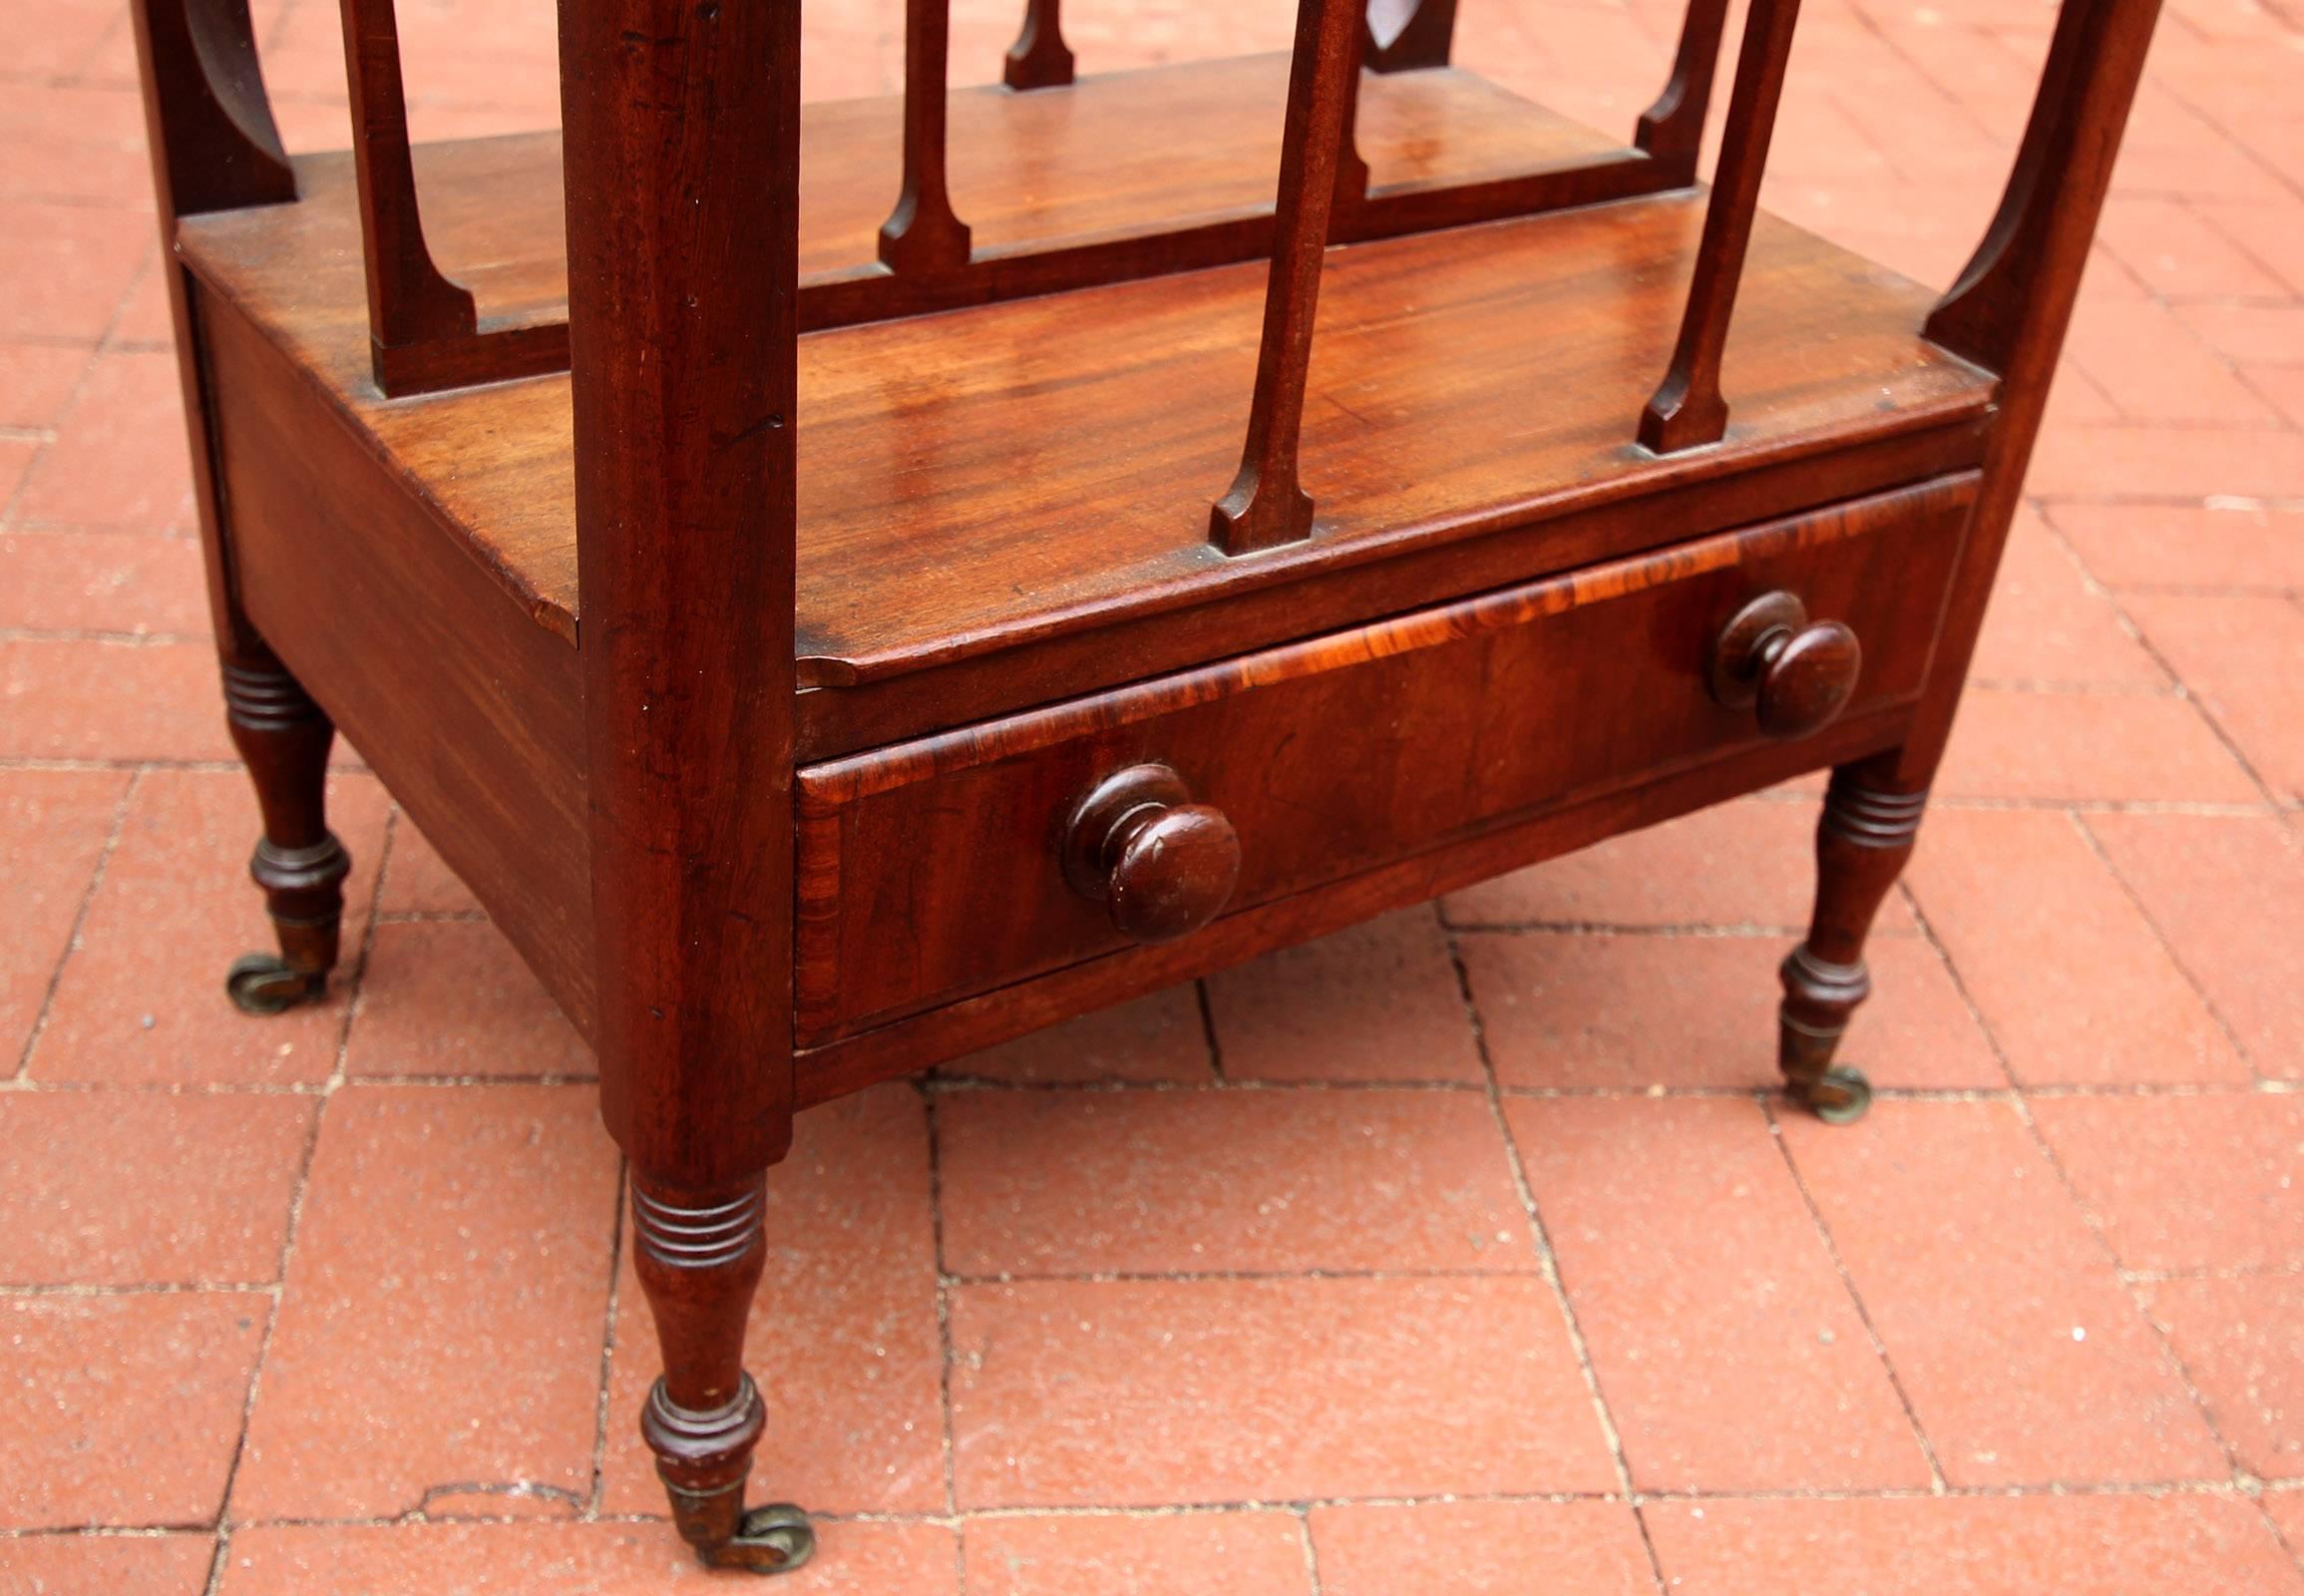 Fine mahogany Canterbury with one-drawer and two wide slots, English, circa 1830. Original finish and original casters.